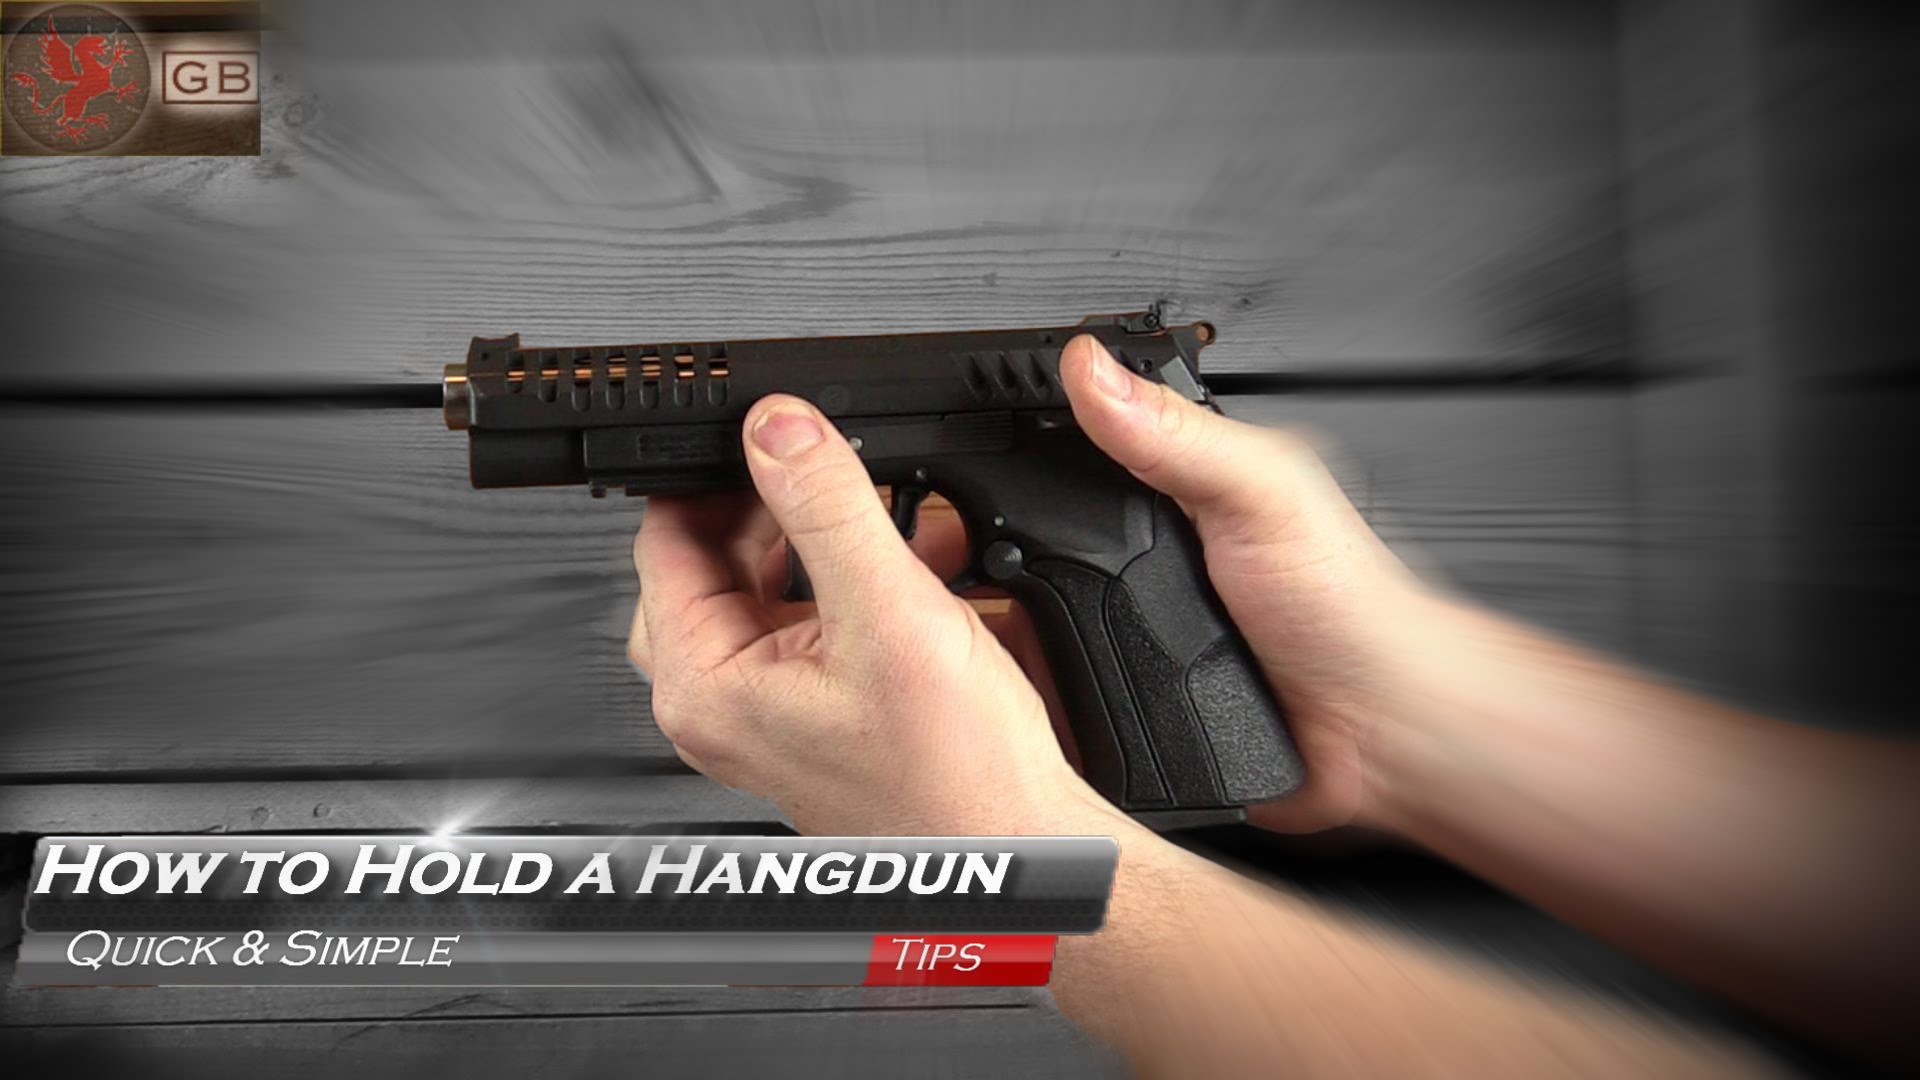 How To Hold a Handgun - YouTube